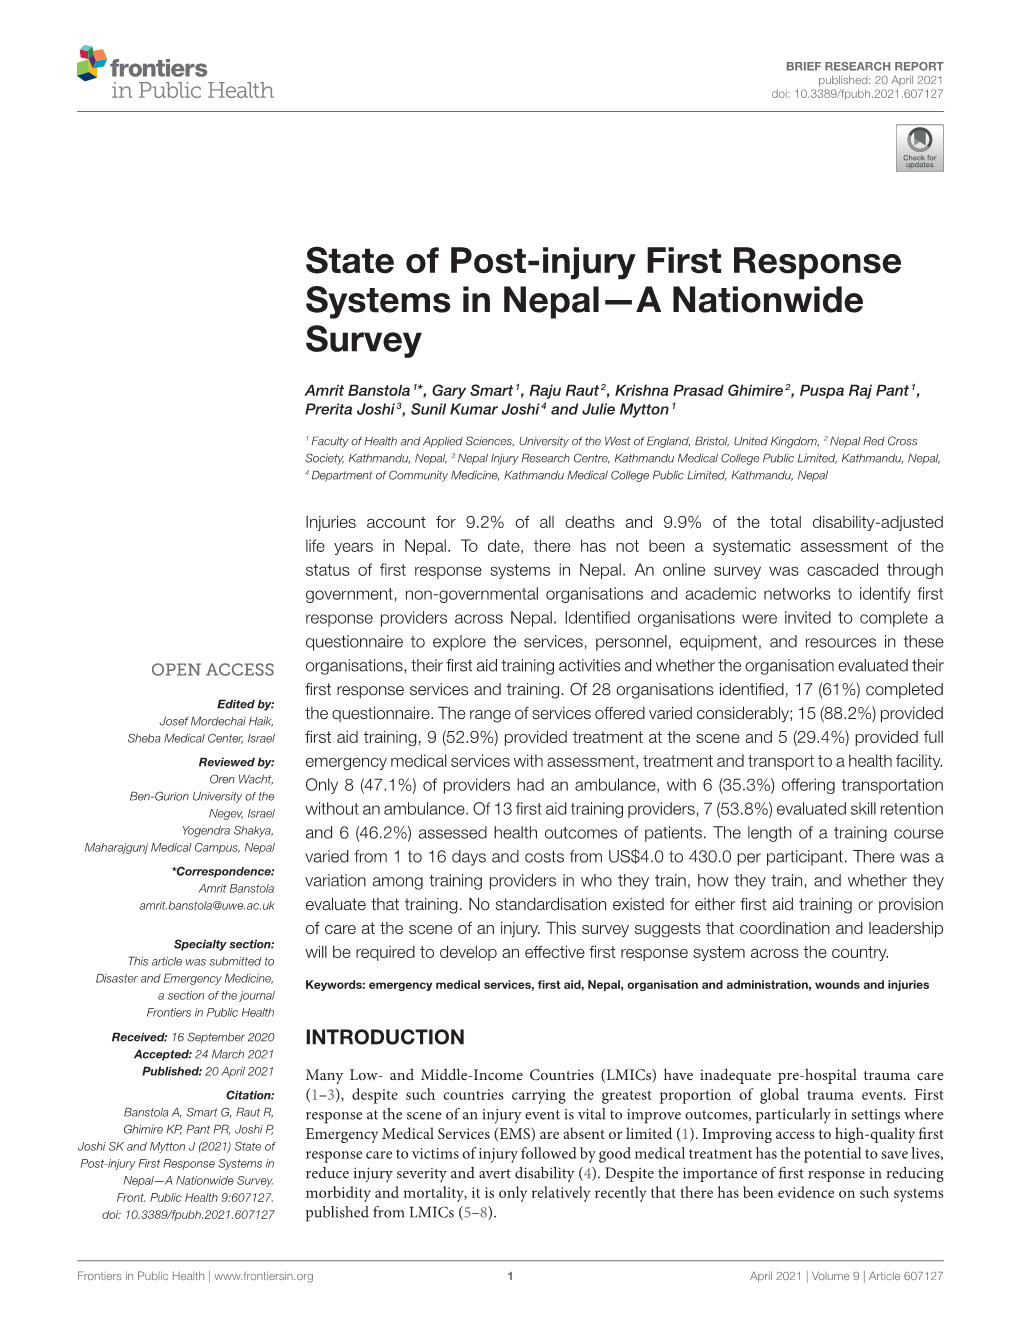 State of Post-Injury First Response Systems in Nepal—A Nationwide Survey